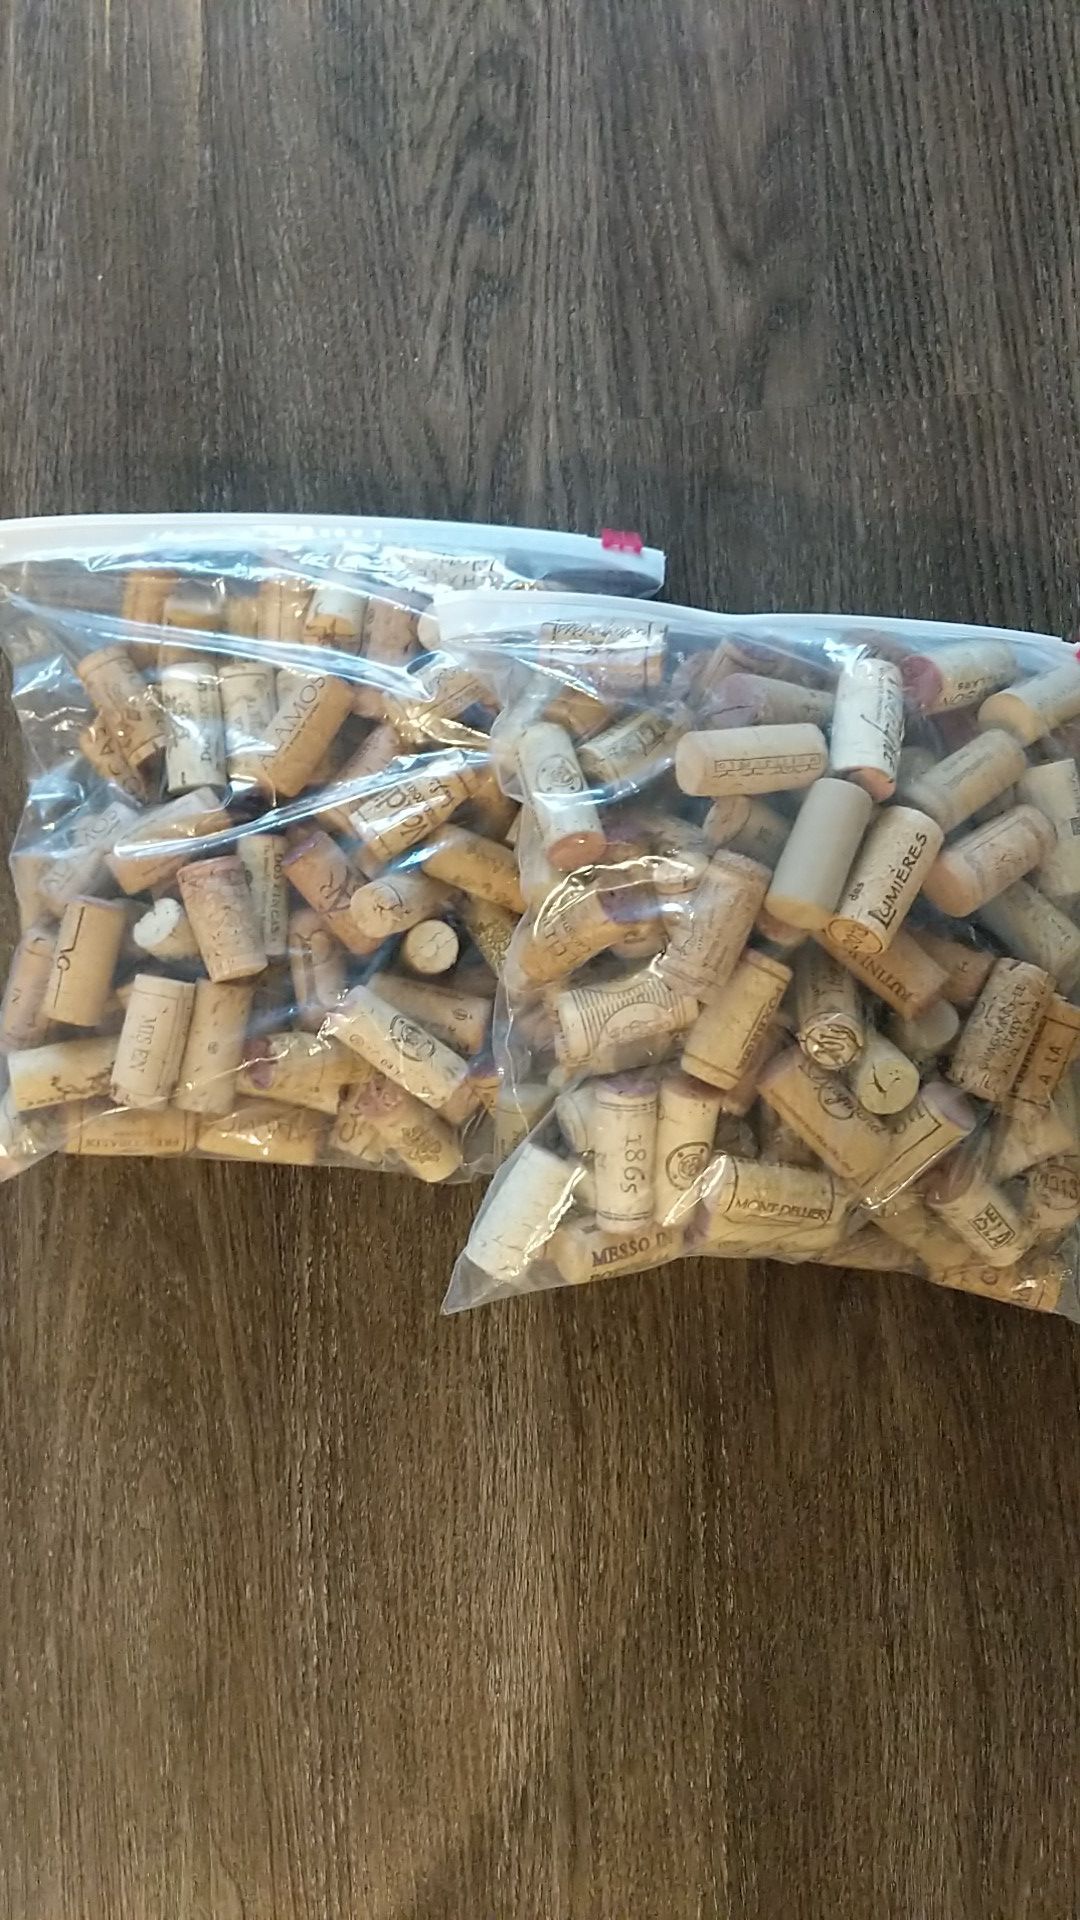 Two bags of wine corks